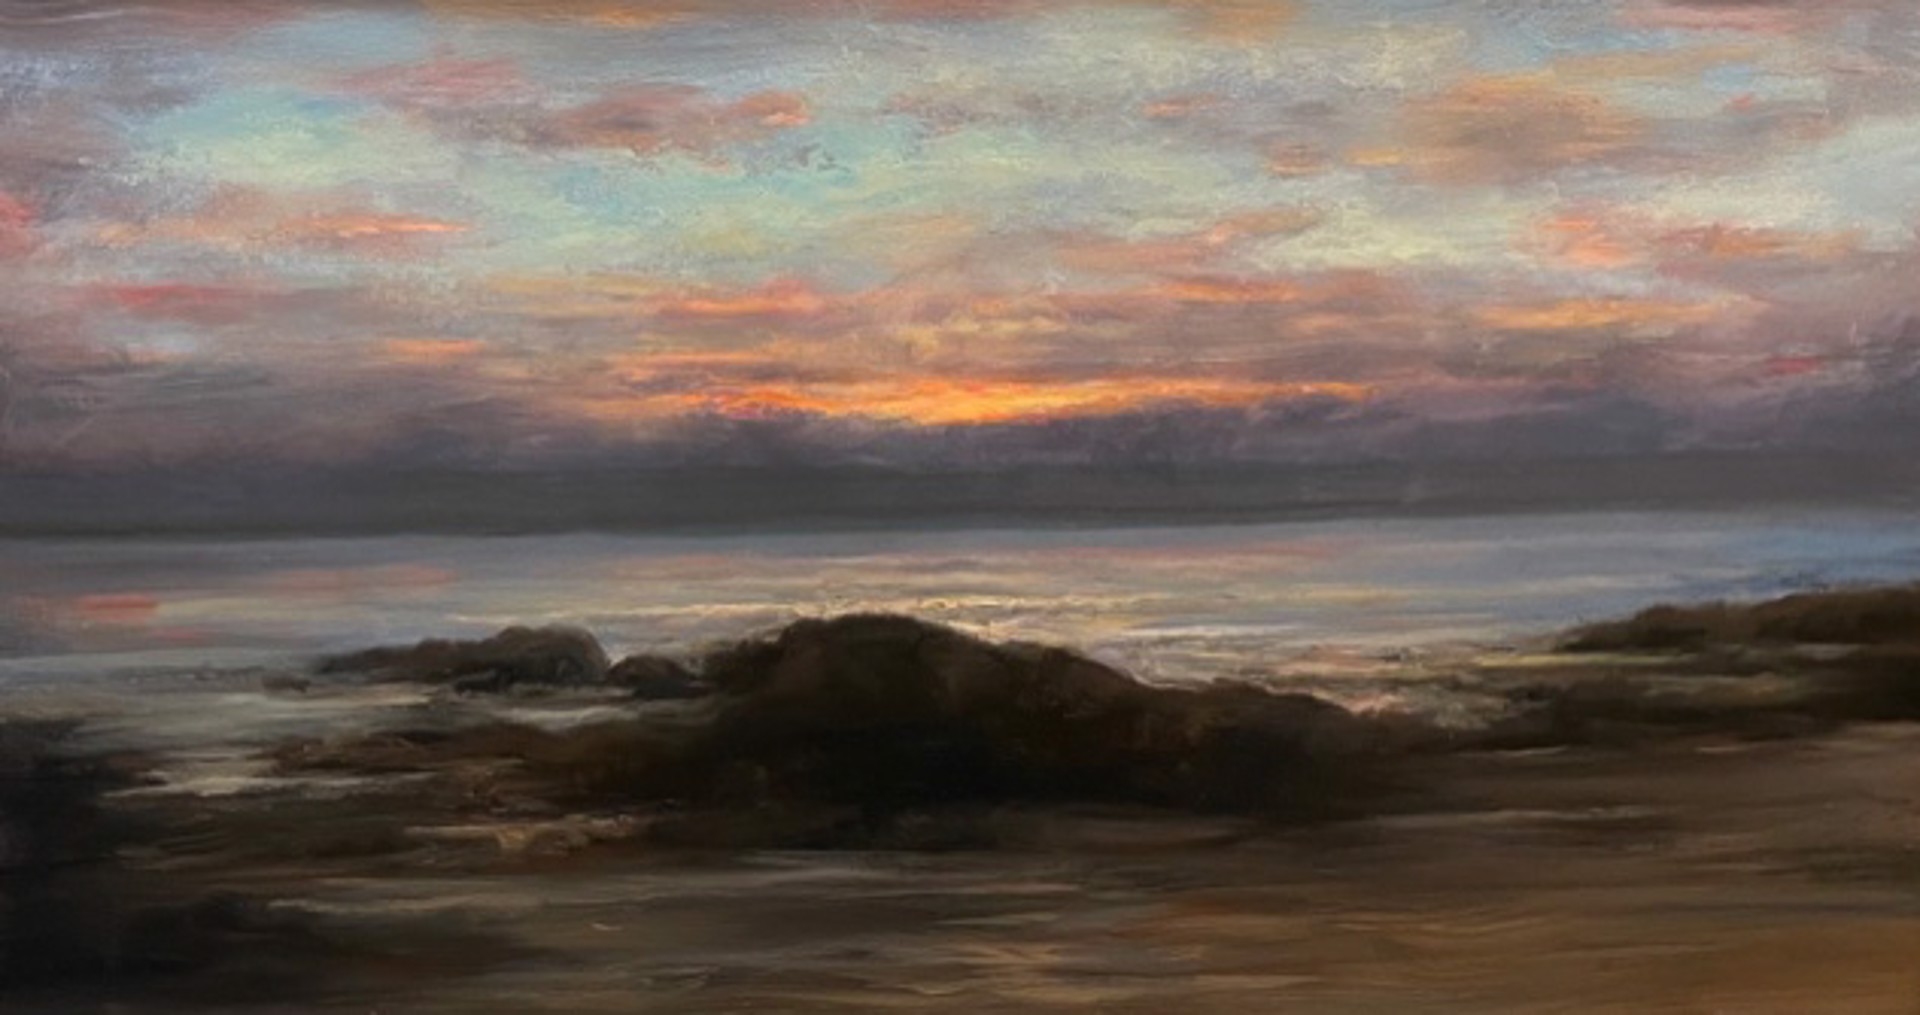 Low Tide at Dusk by Dennis Sheehan